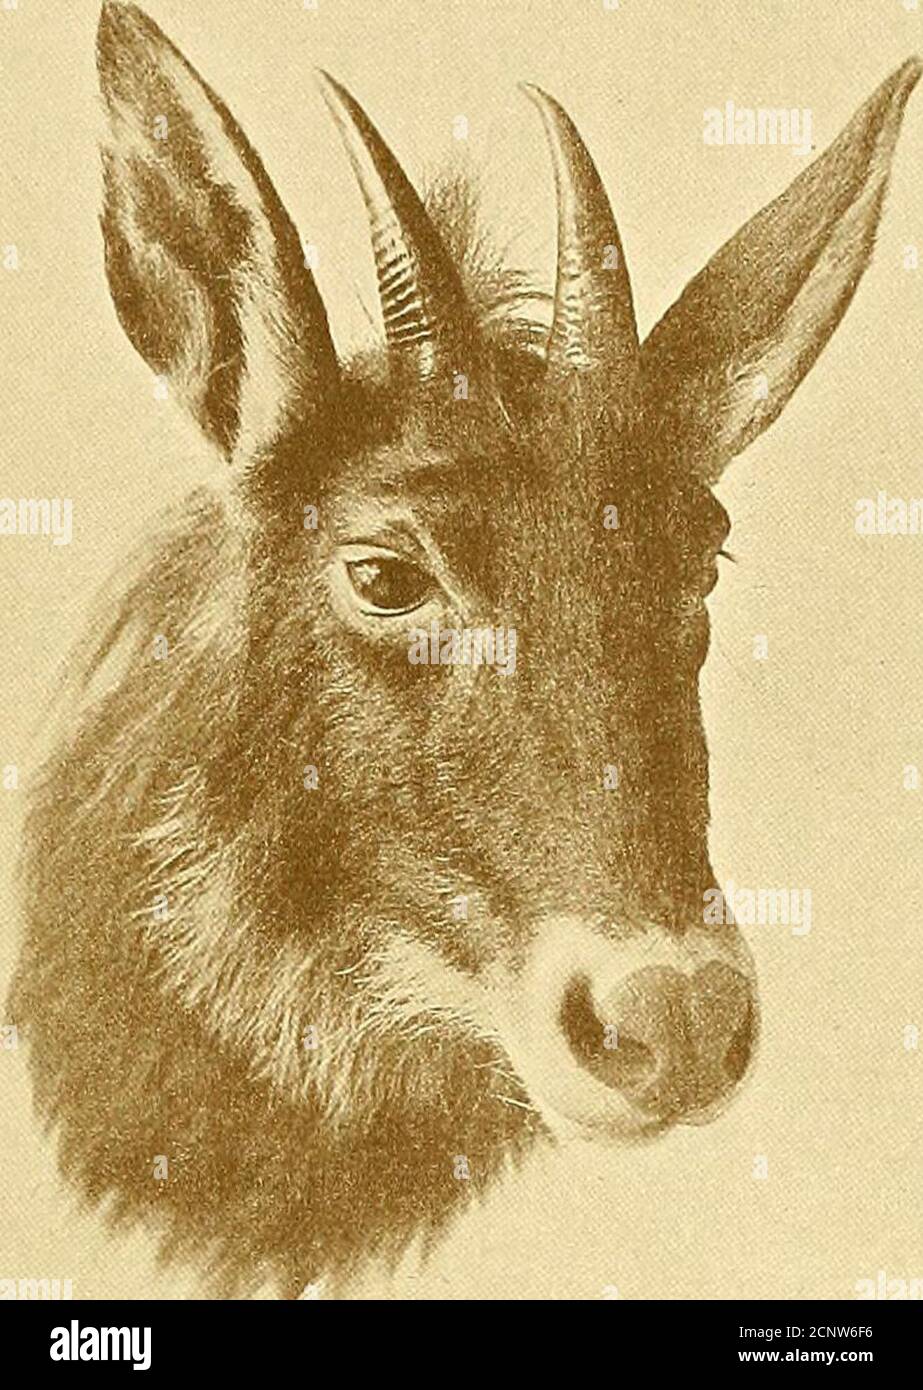 . Records of big game with their distribution, characteristics, dimensions, weights, and horn & tusk measurements . WS. Gni Lu of Chinese. Species. Length Tip to Collected by on front Girth, rj!. Locality. Owner. curve. Capricornis milne-edwardsi Abbe A. David -%-8A 7h 7s 42 Moupin, Sze-chuan Paris Museum(Type). -8 Ichang . Comdr. F. B.Noble, R.N. 75/5 3§ 3i Shen-si . K. K. Horn. Nemorhsedus cinereus Abbe A. David -j9 7h 3s3 3t^ Sze-chuanNankou . Paris Museum (Type).W. F. Collins. ,, caudatus Abbe A. David -6^Ti61 -, 94 3b3* North of Pekin ? Paris Museum (Type).British Museum griseus . Do. Stock Photo